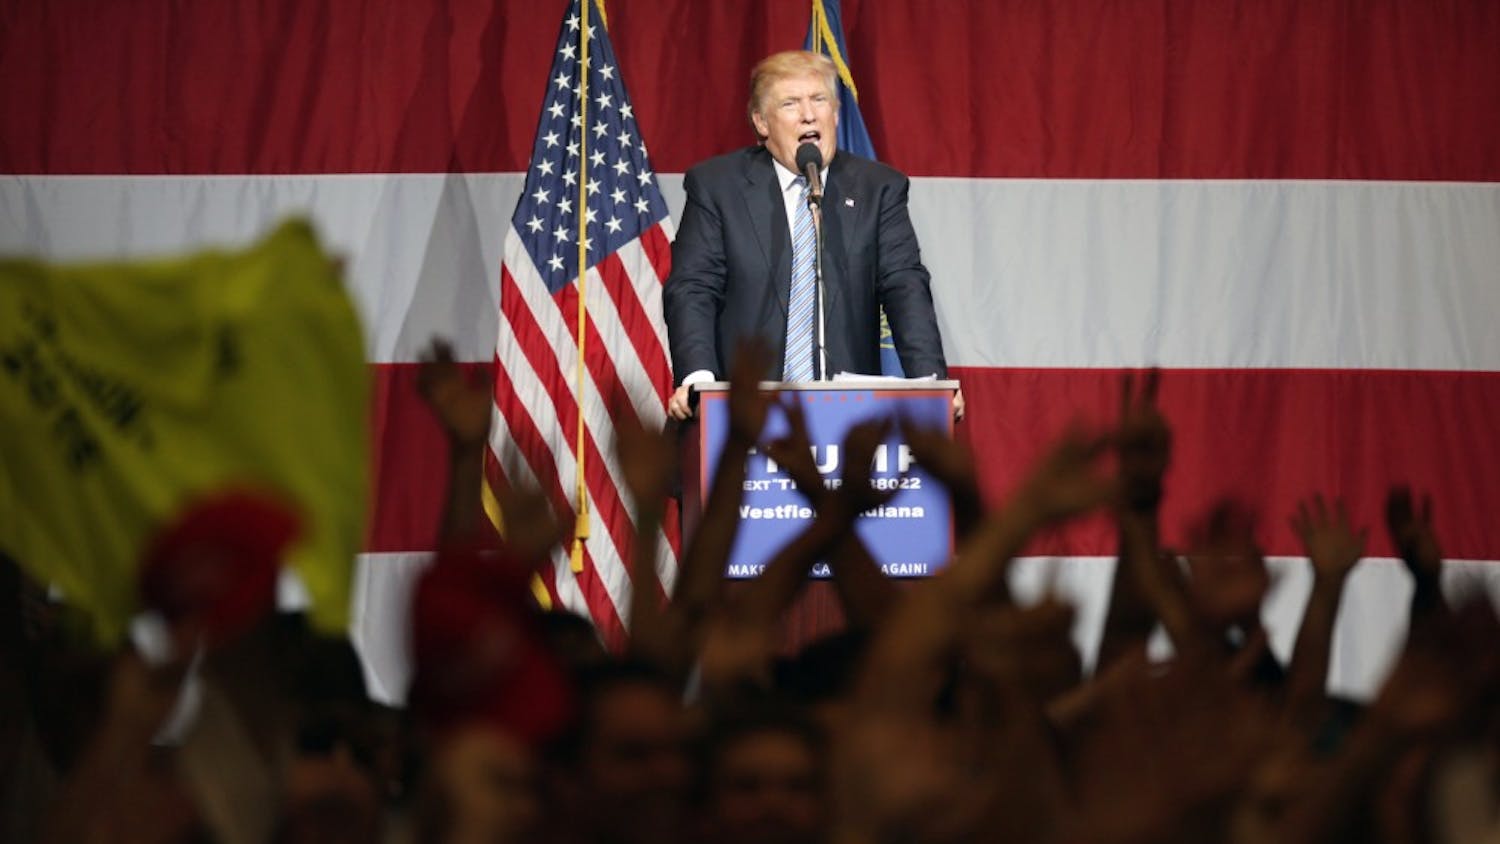 Donald Trump, republican presidential candidate, has his supporters reference the media during a Trump rally in Westfield, Ind. on Tuesday evening.  The media does not show all of his supporters and only focuses on him, Trump said.  "I'm the messenger, you're the important ones in the whole thing," he said.